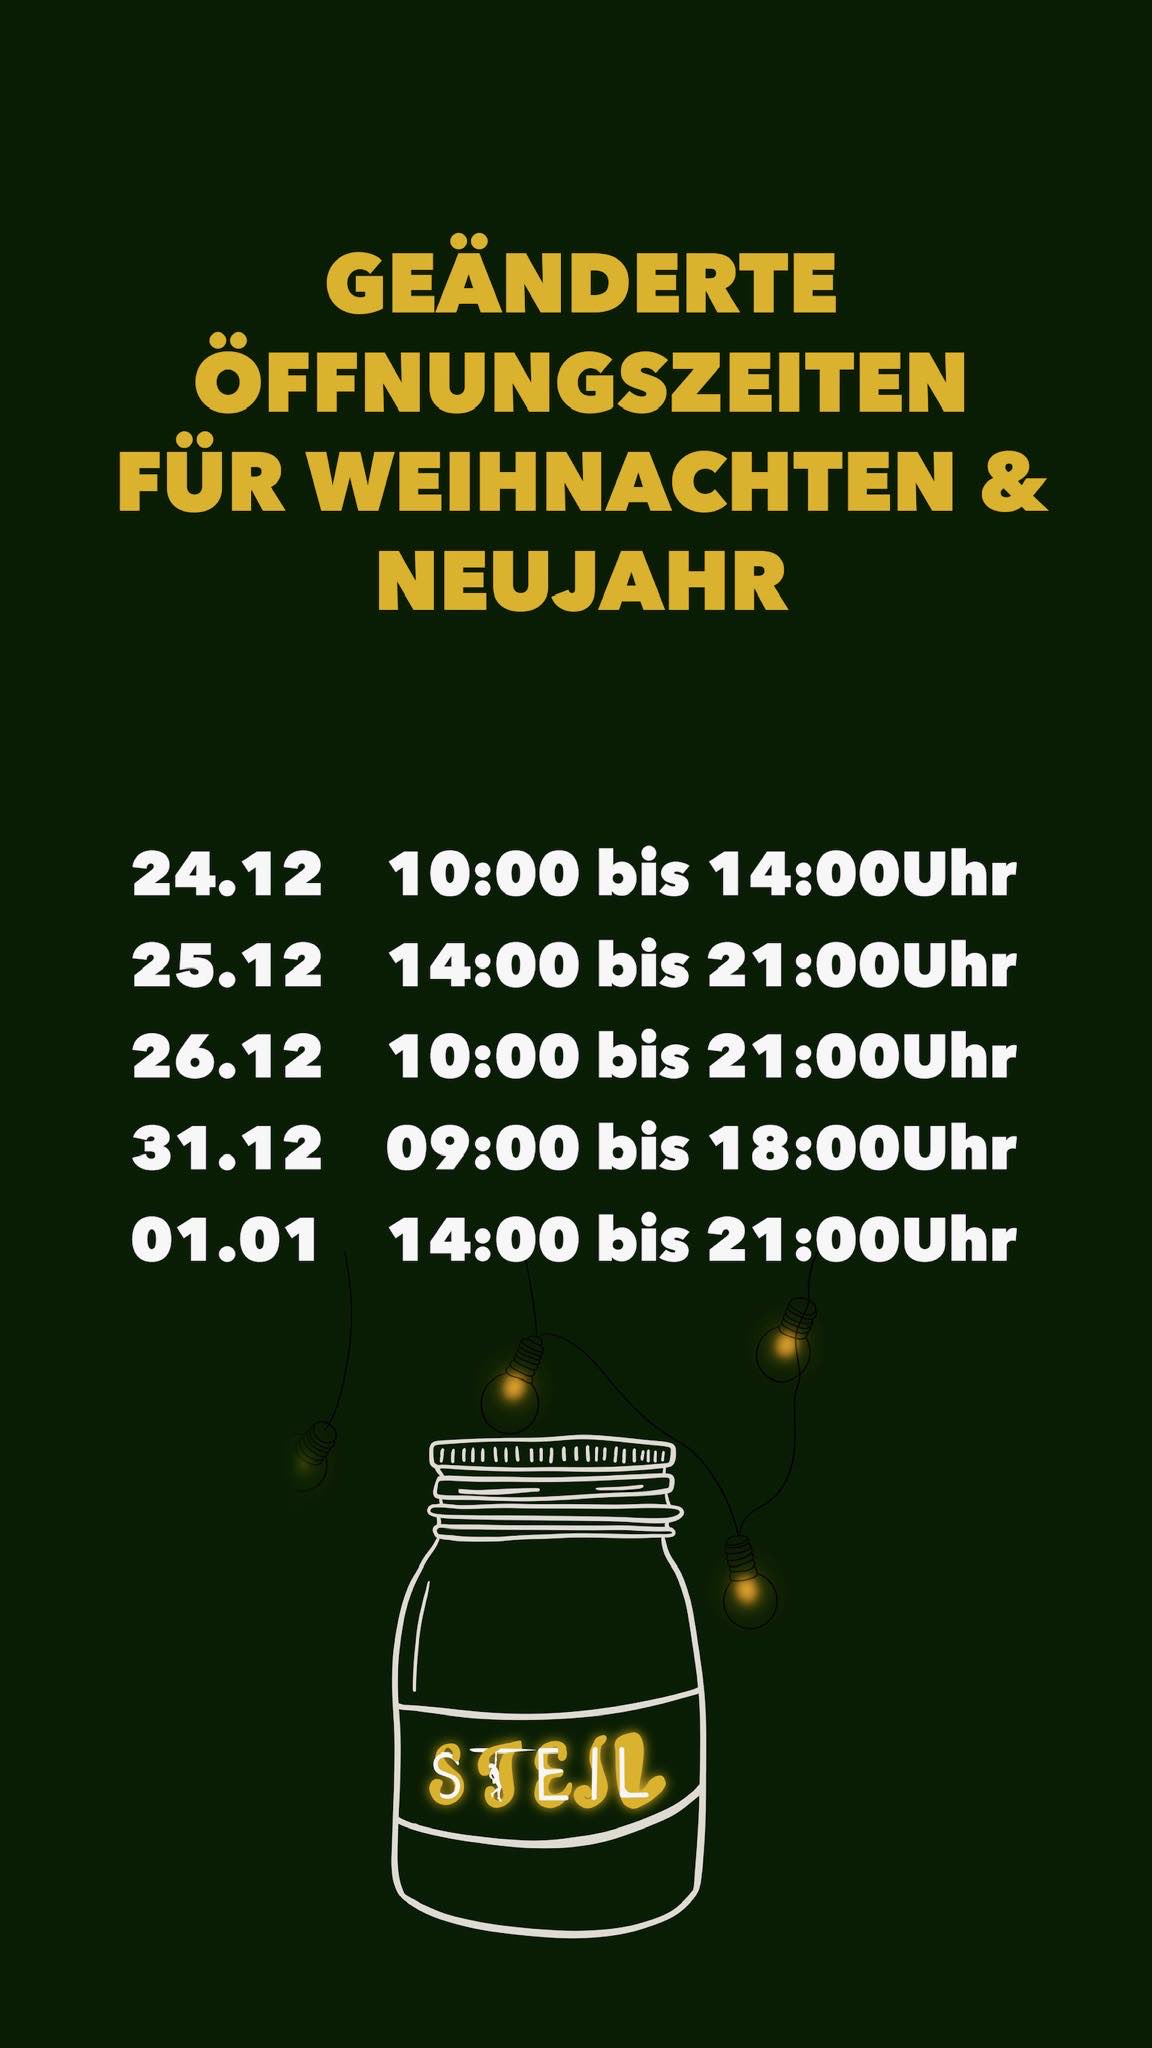 Steil Holidays. Opening hours of Boulderhalle Steil in Karlsruhe Christmas a new years eve: 24.12.: 10 am to 2 pm, 25.12.: 2 pm to 9 pm, 26.12.: 10 am to 9 pm, 31.12. 9 am to 6 pm and 01.01.: 2 pm to 9 pm.